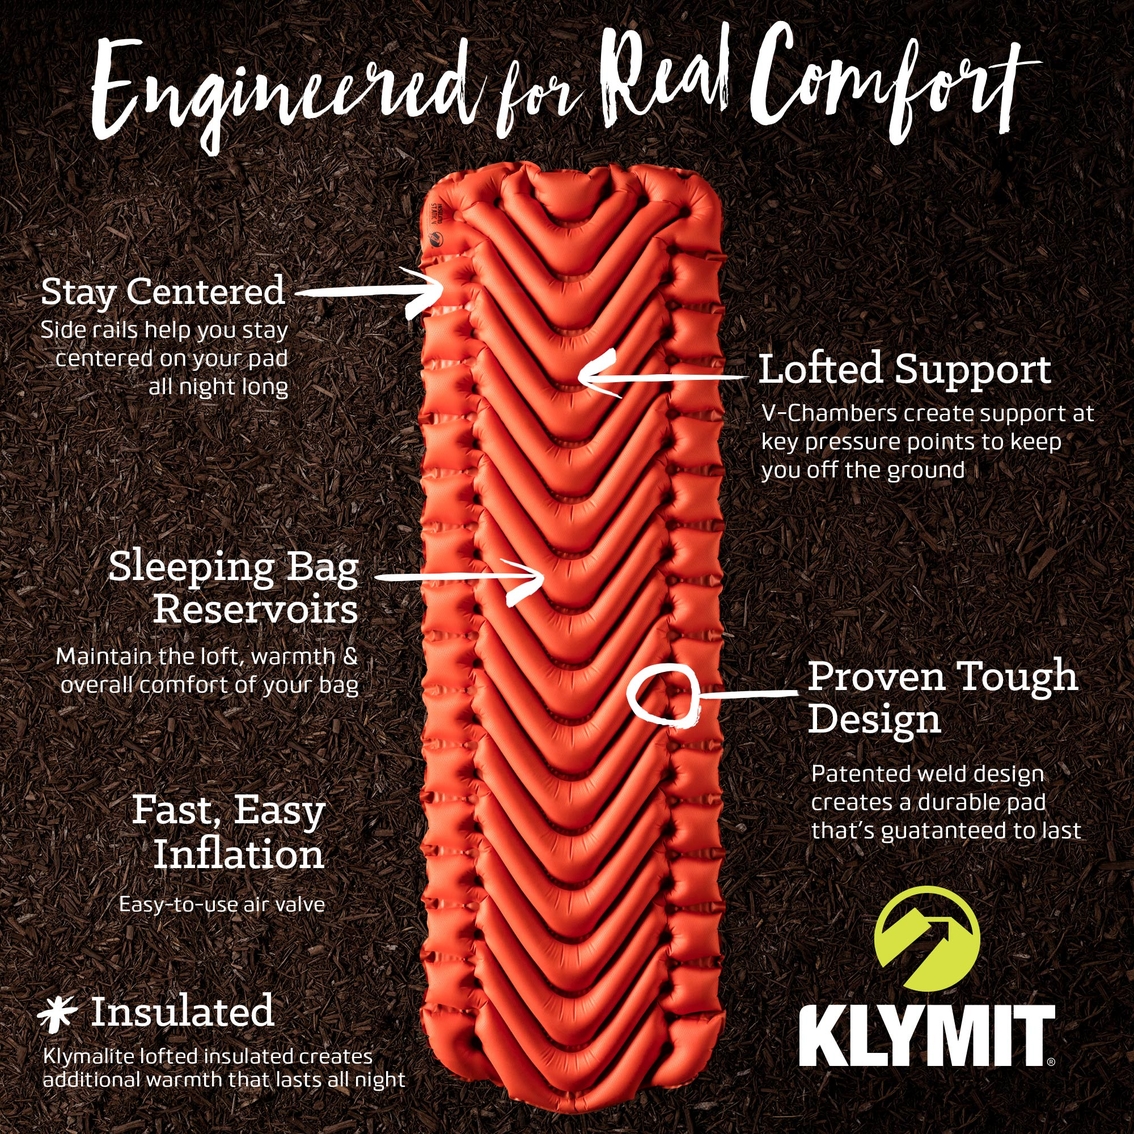 Klymit Insulated Static V Sleeping Pad - Image 8 of 10